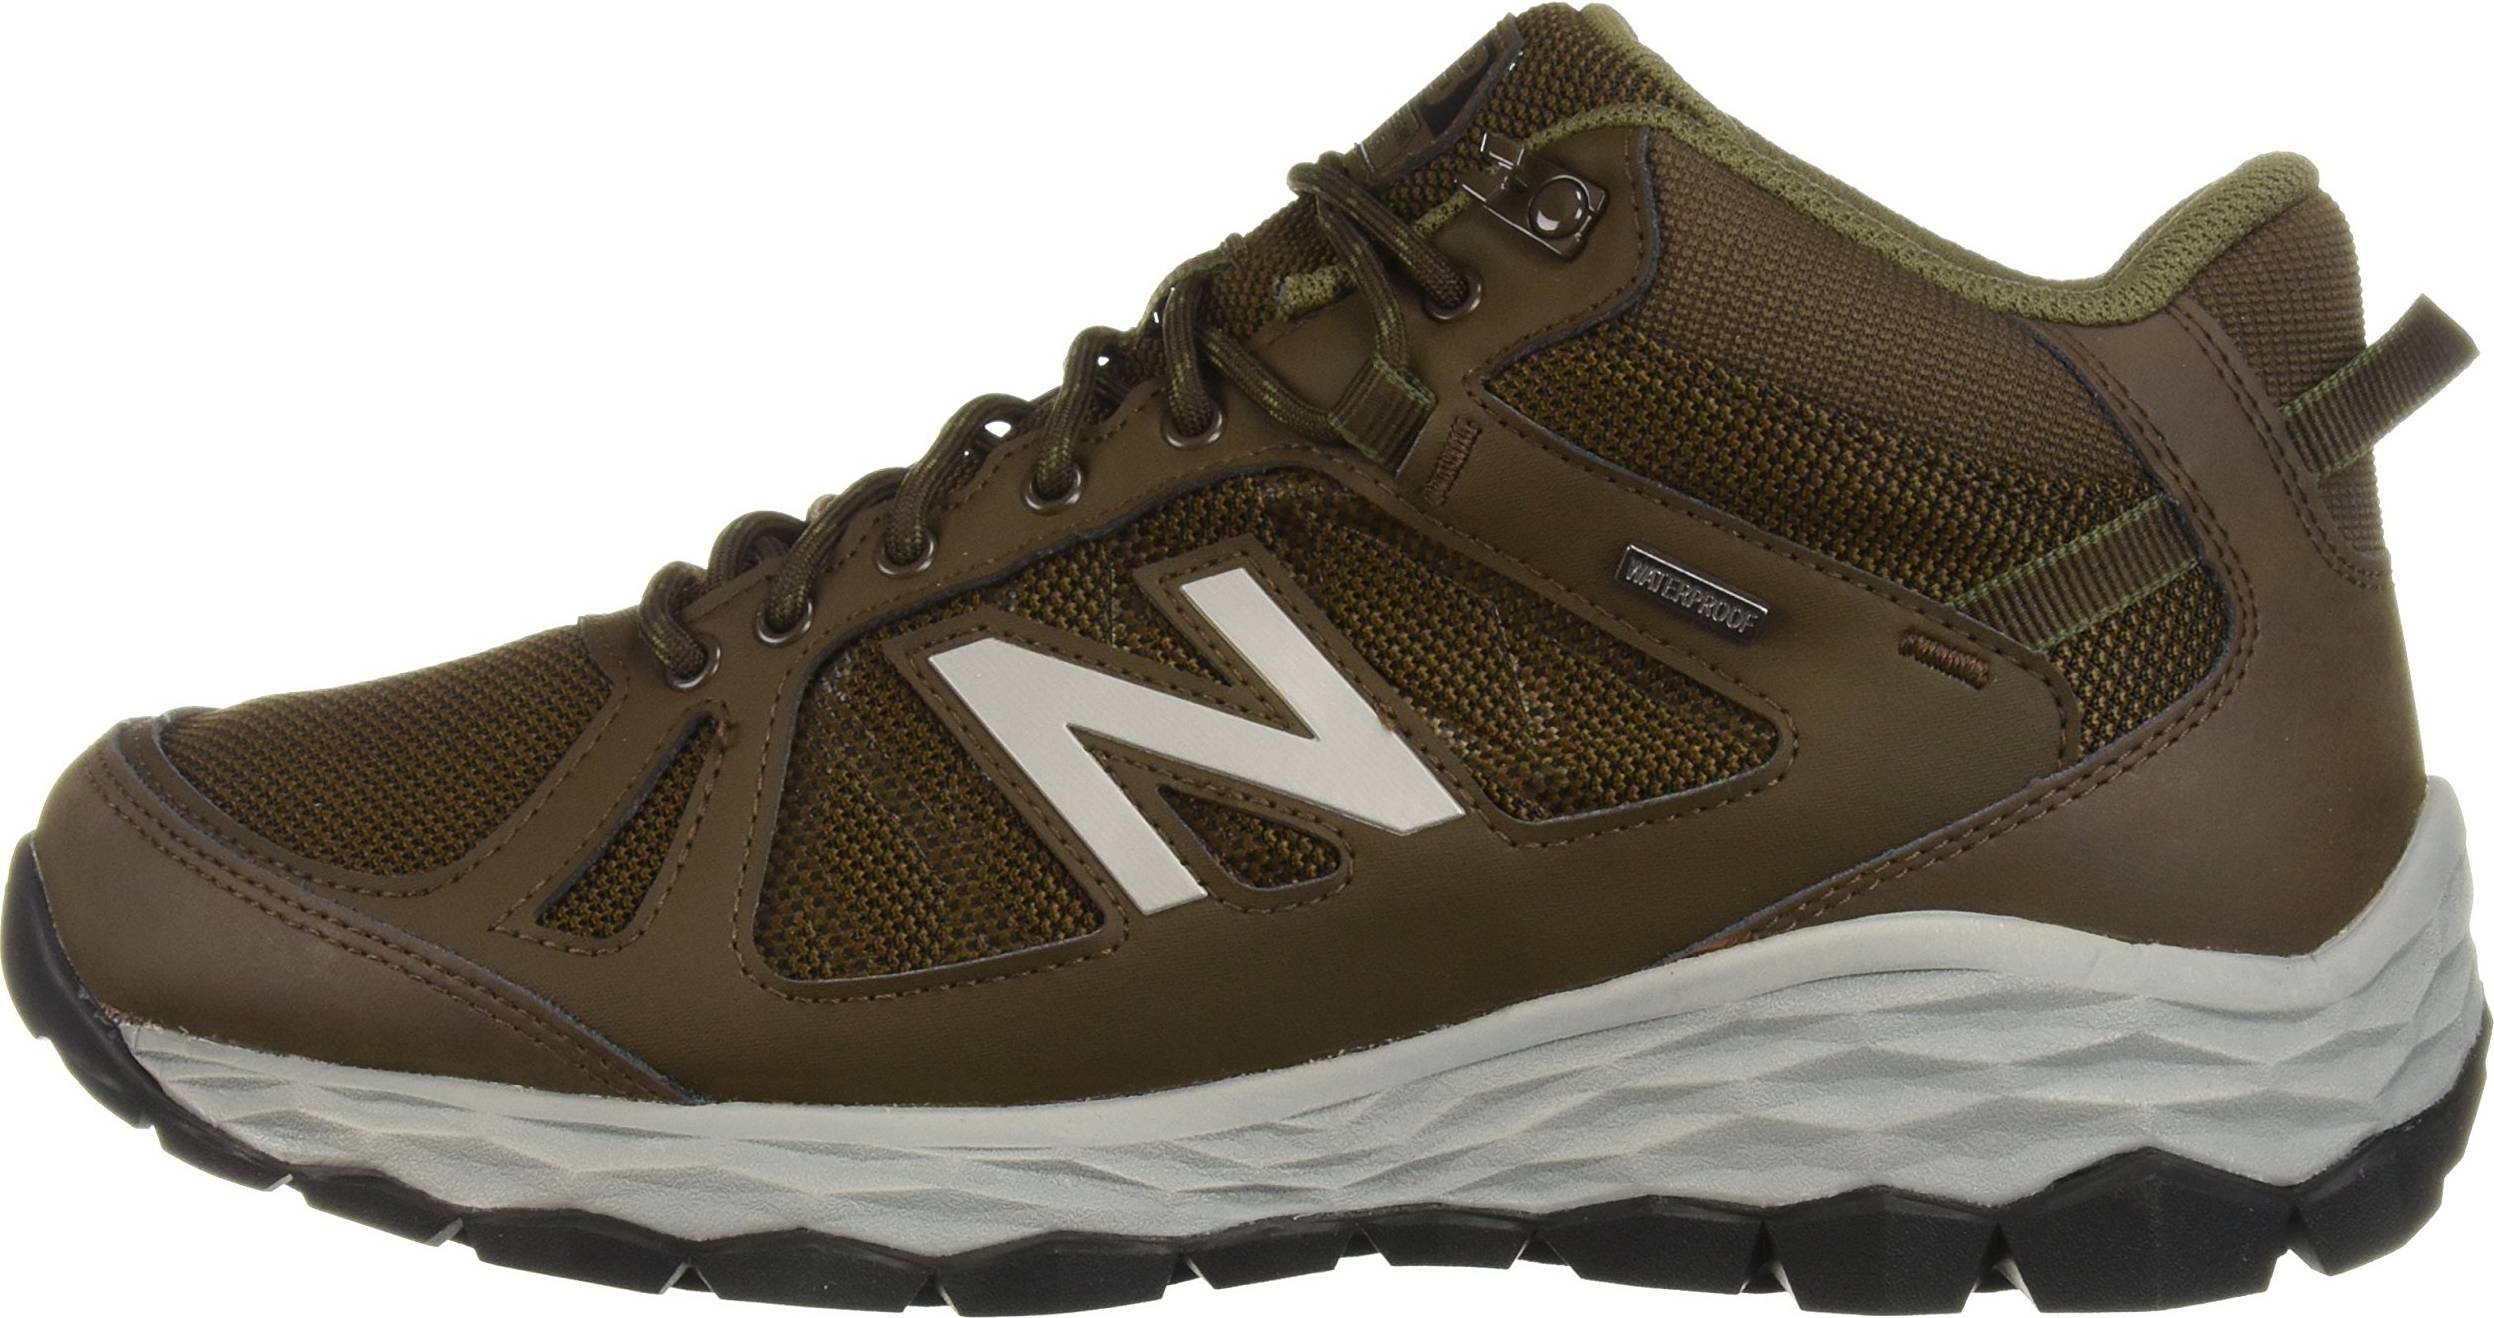 Only $56 + Review of New Balance 1450 